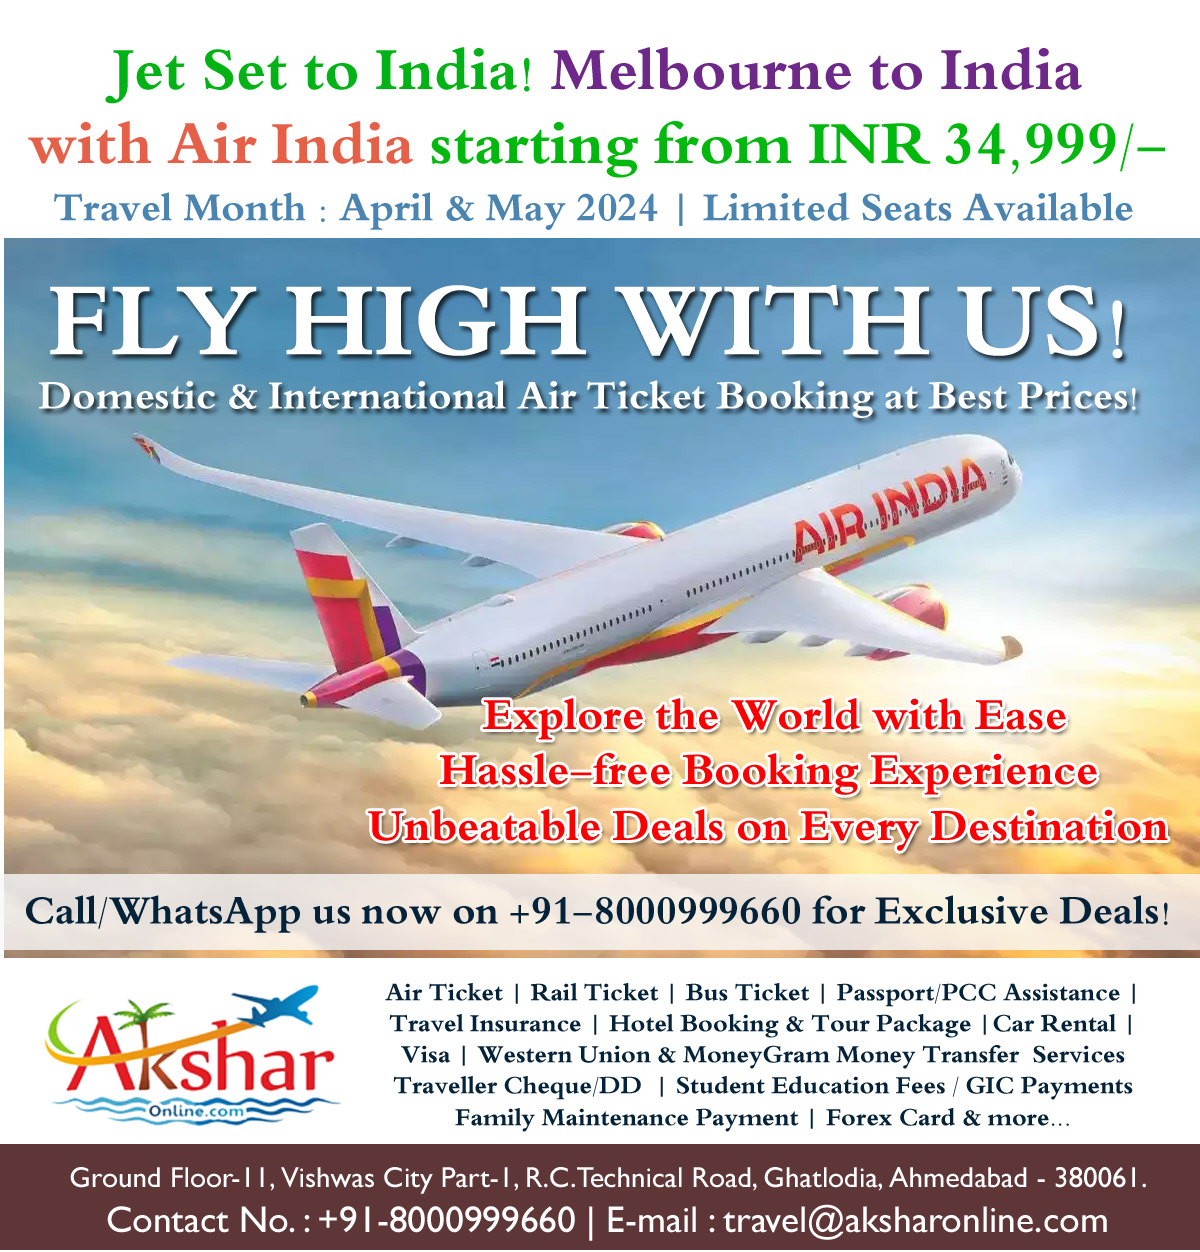 🌟 Incredible Offer Alert! Fly From Australia (Melbourne to India) @ Rs. 34,999/- Onwards with Air India Airlines! 🇦🇺✈️🇮🇳  Are you ready for an unforgettable adventure to the heart of India? Look no further! ✈️ Explore the mesmerizing sights and sounds of India from Melbourne with Air India starting from just Rs. 34,999/-. 🌏  🌟 Here's what you need to do: 1️⃣ Call/Whatsapp us at +91-8000999660 to secure your tickets. 2️⃣ Email us at travel@aksharonline.com for personalized assistance and bookings.  ✨ Hurry, seats are filling up fast! Don't miss out on this amazing opportunity to experience the magic of India. Contact us now and let's make your travel dreams a reality! ✨  #TravelWithAksharOnline #MelbourneToIndia #AirIndia #BookNow #TravelDeals #ExploreIndia #IncredibleIndia